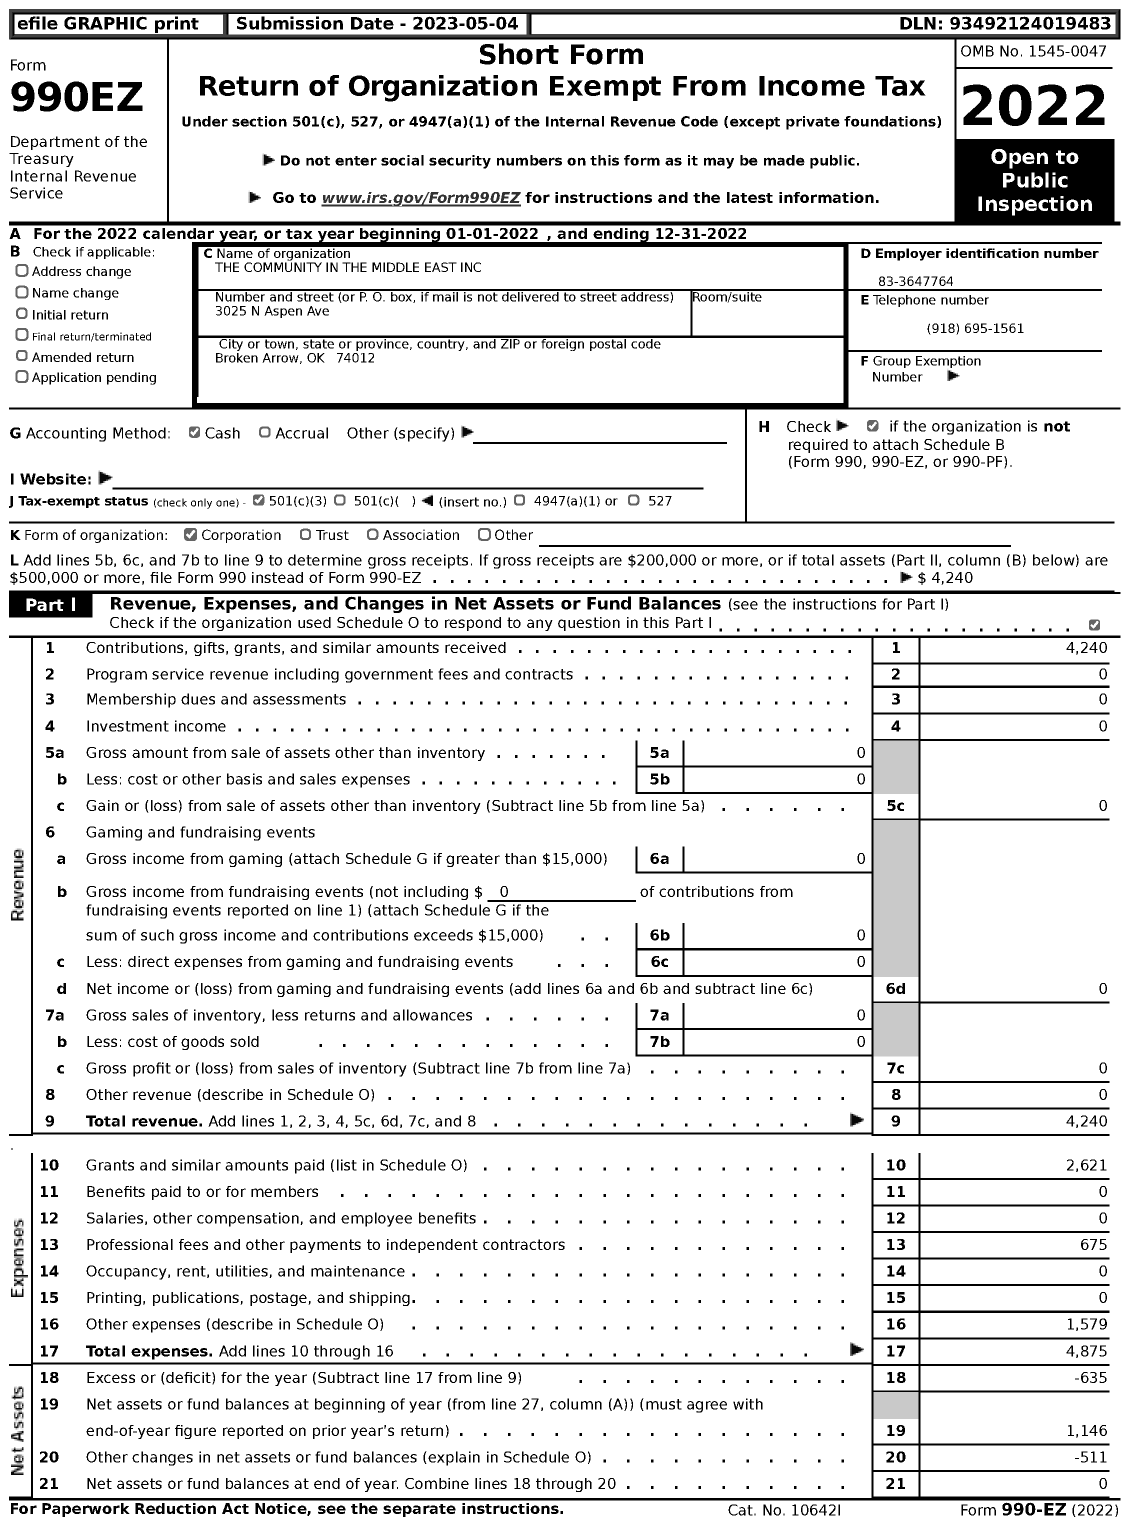 Image of first page of 2022 Form 990EZ for the Community in the Middle East